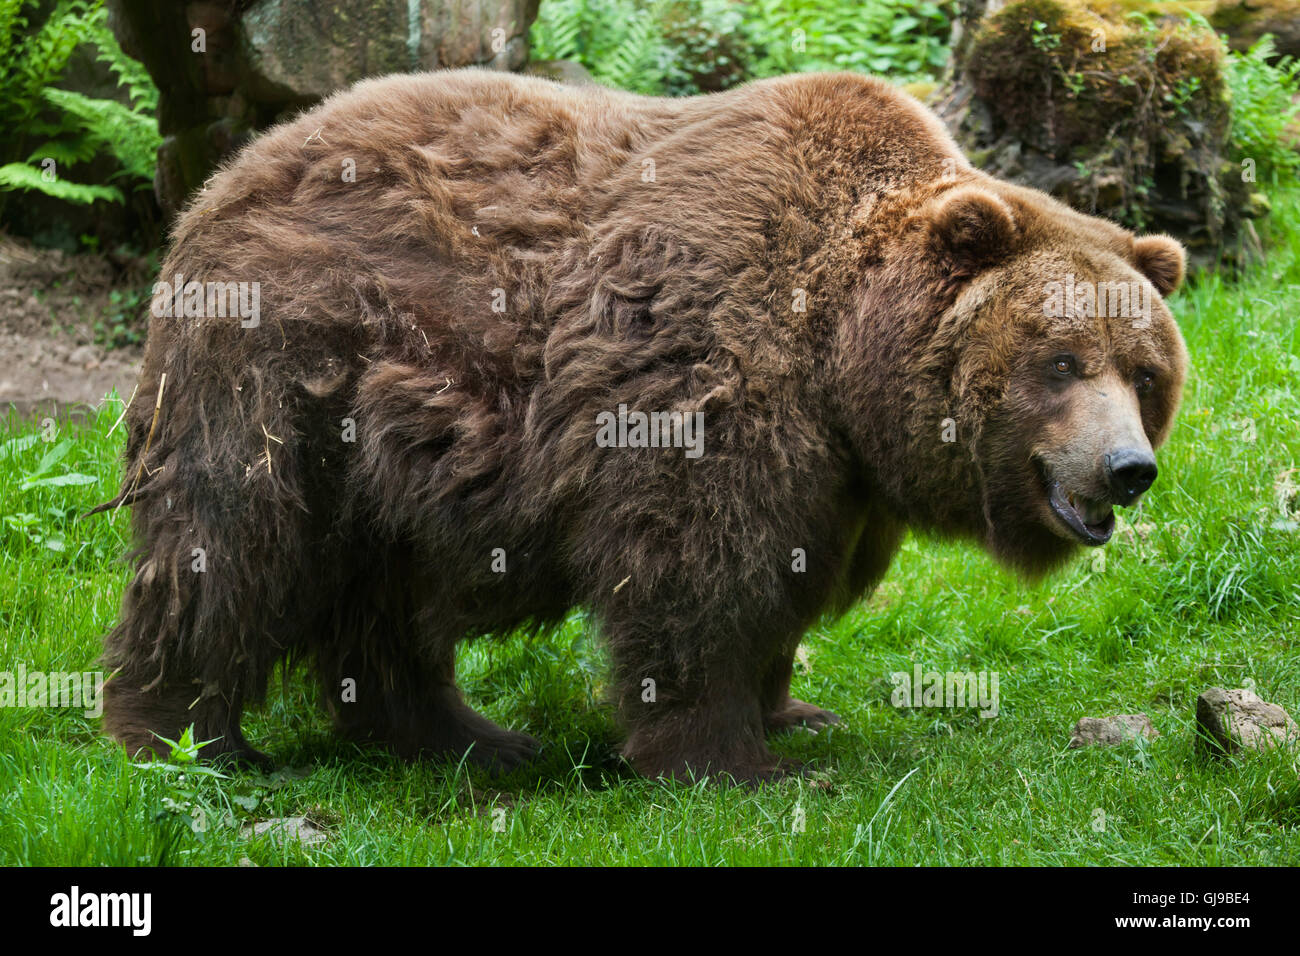 Mainland grizzly (Ursus arctos horribilis) at Decin Zoo in North Bohemia, Czech Republic. Male mainland grizzly bear Siegfried Stock Photo